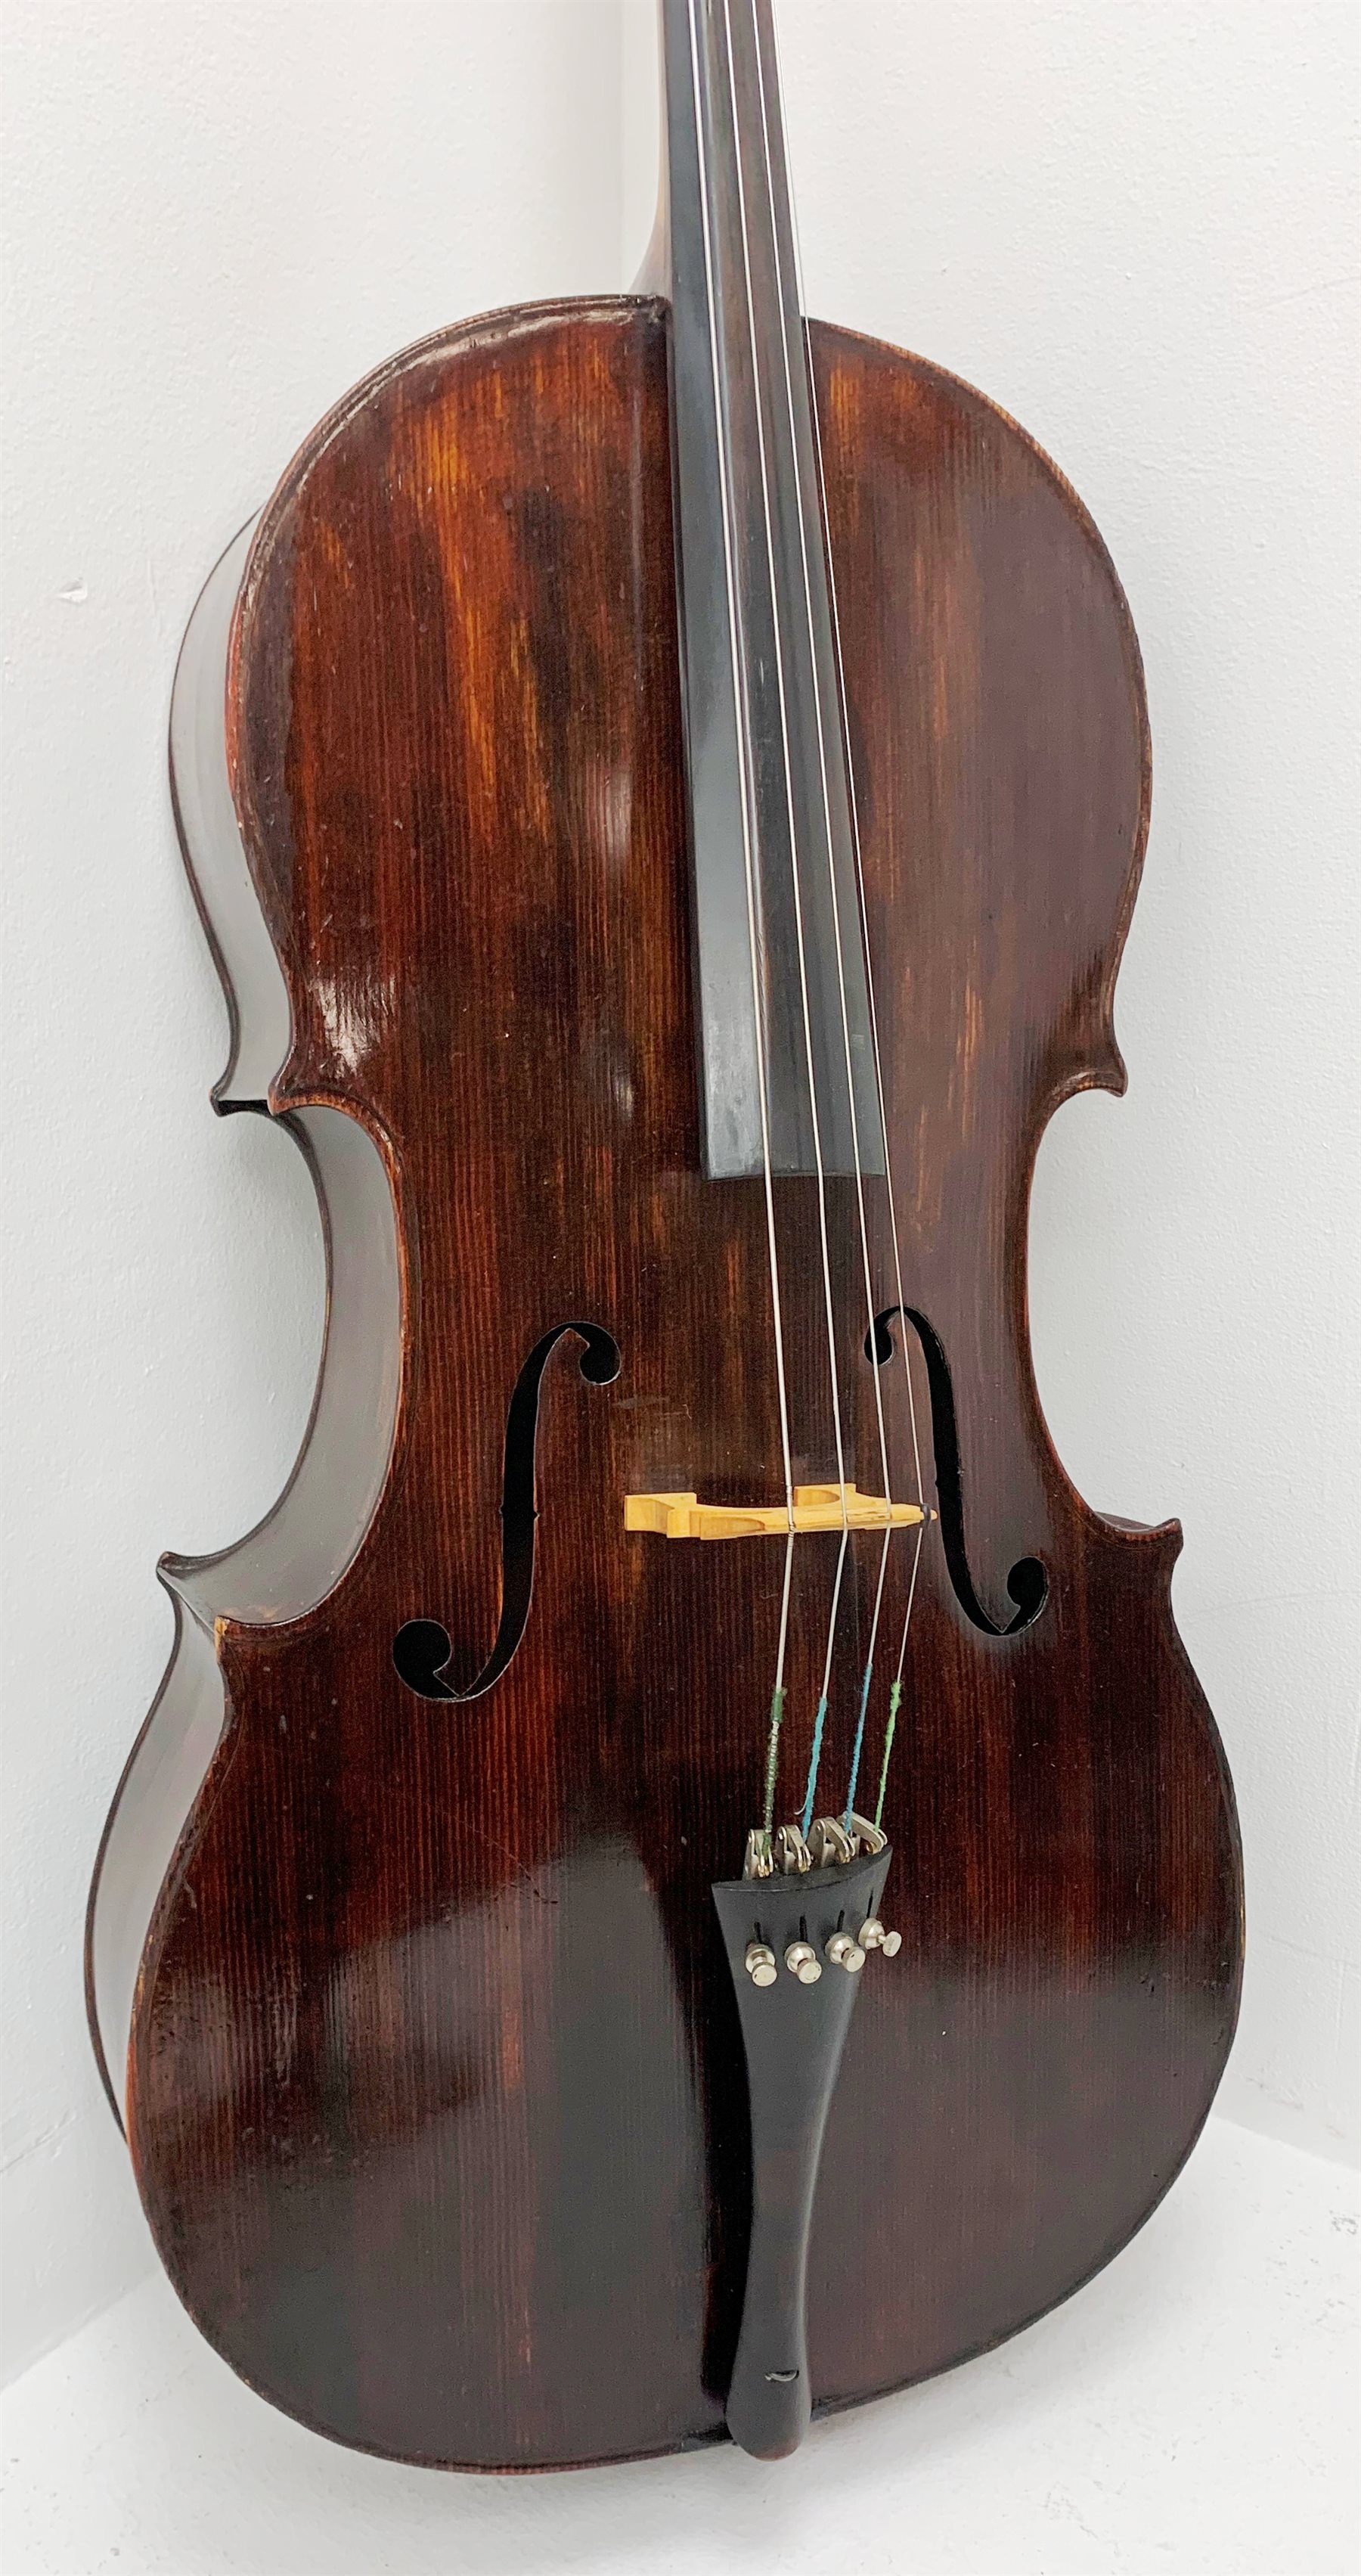 Early 20th century French Mirecourt cello with 76cm two-piece maple back and ribs and spruce top, b - Image 7 of 10